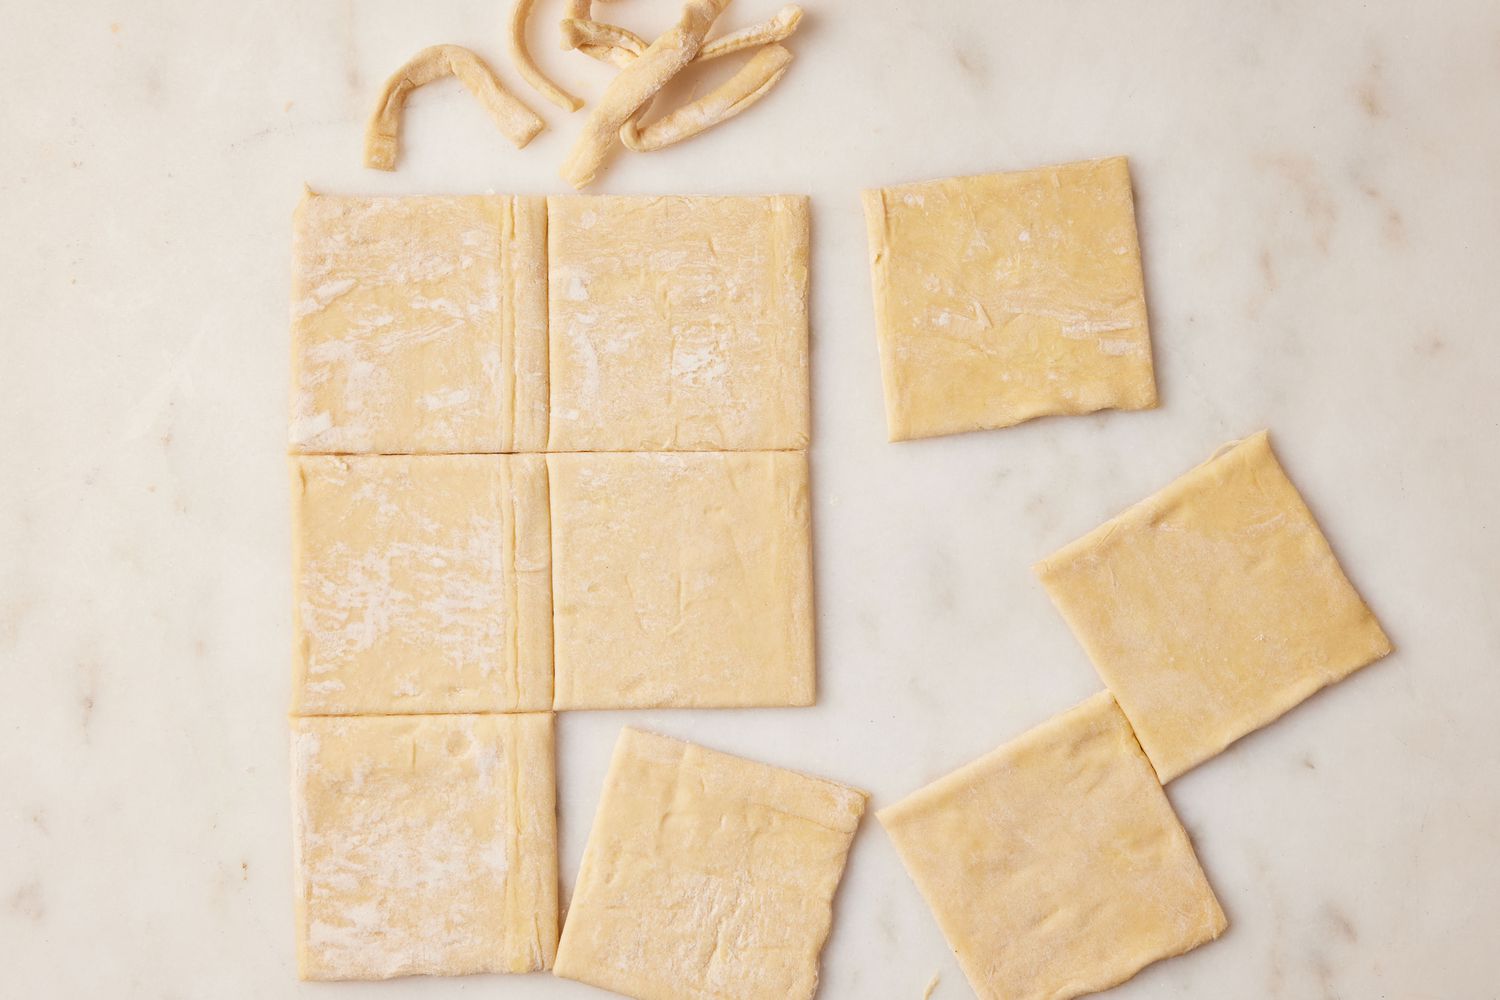 9 even squares of puff pastry, with the ends trimmed